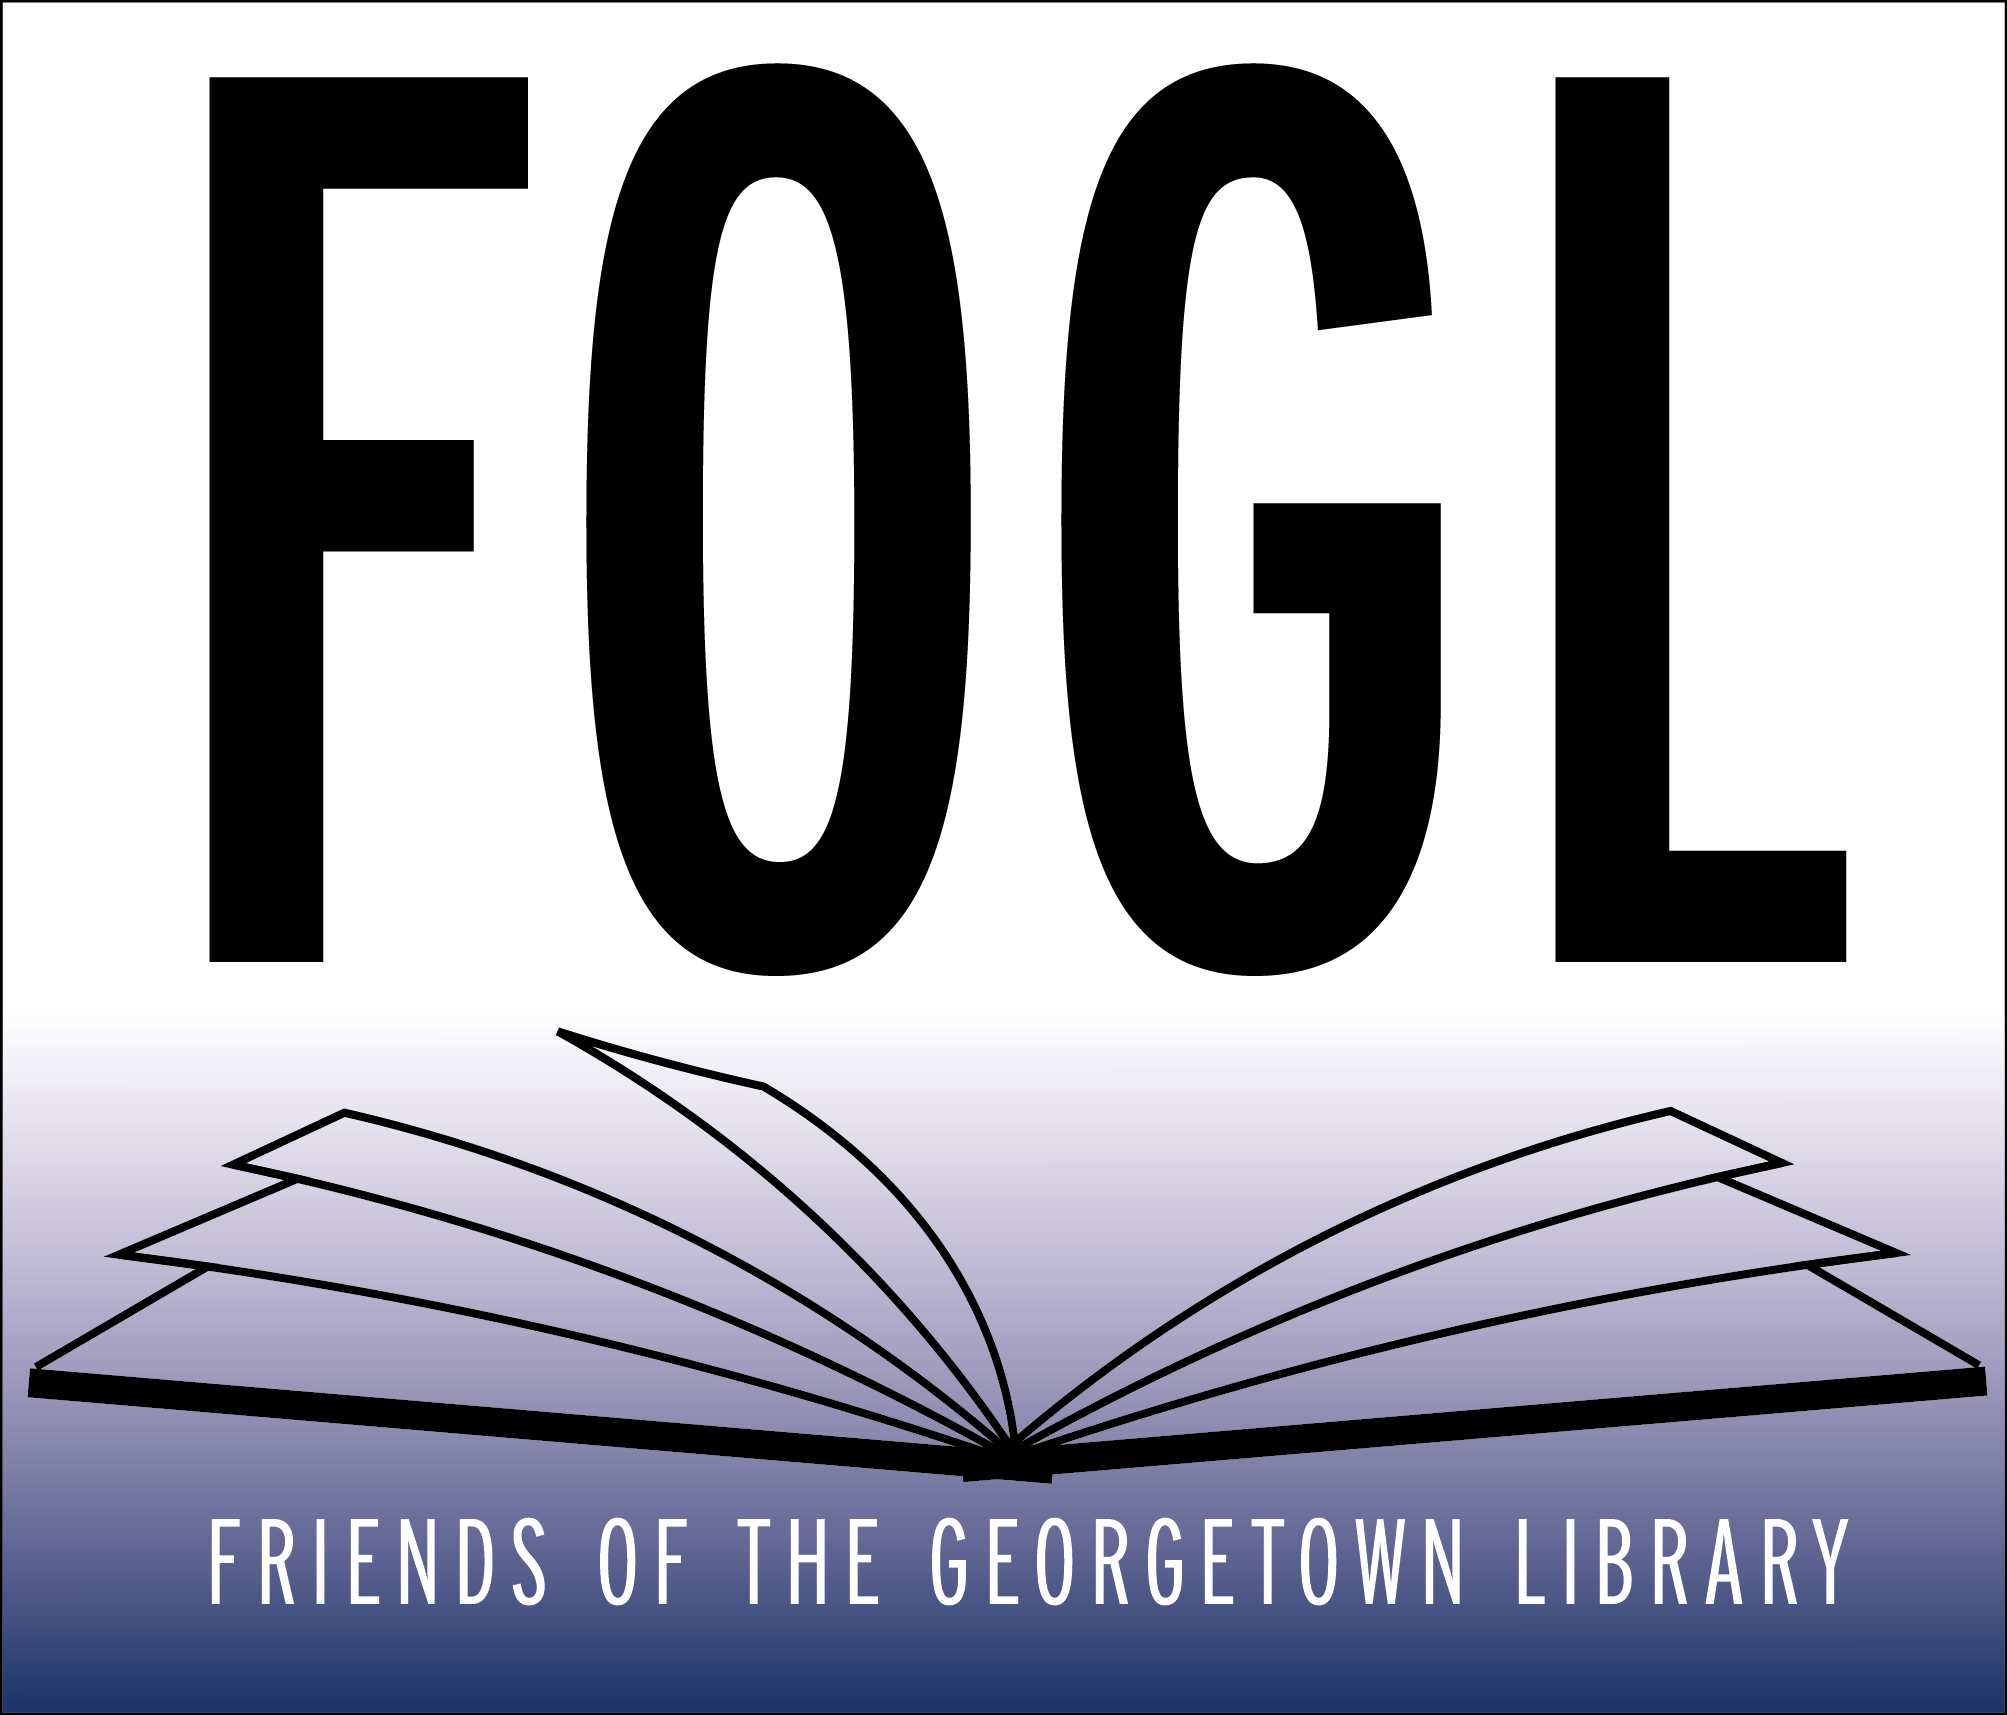 Friends of the Georgetown Library